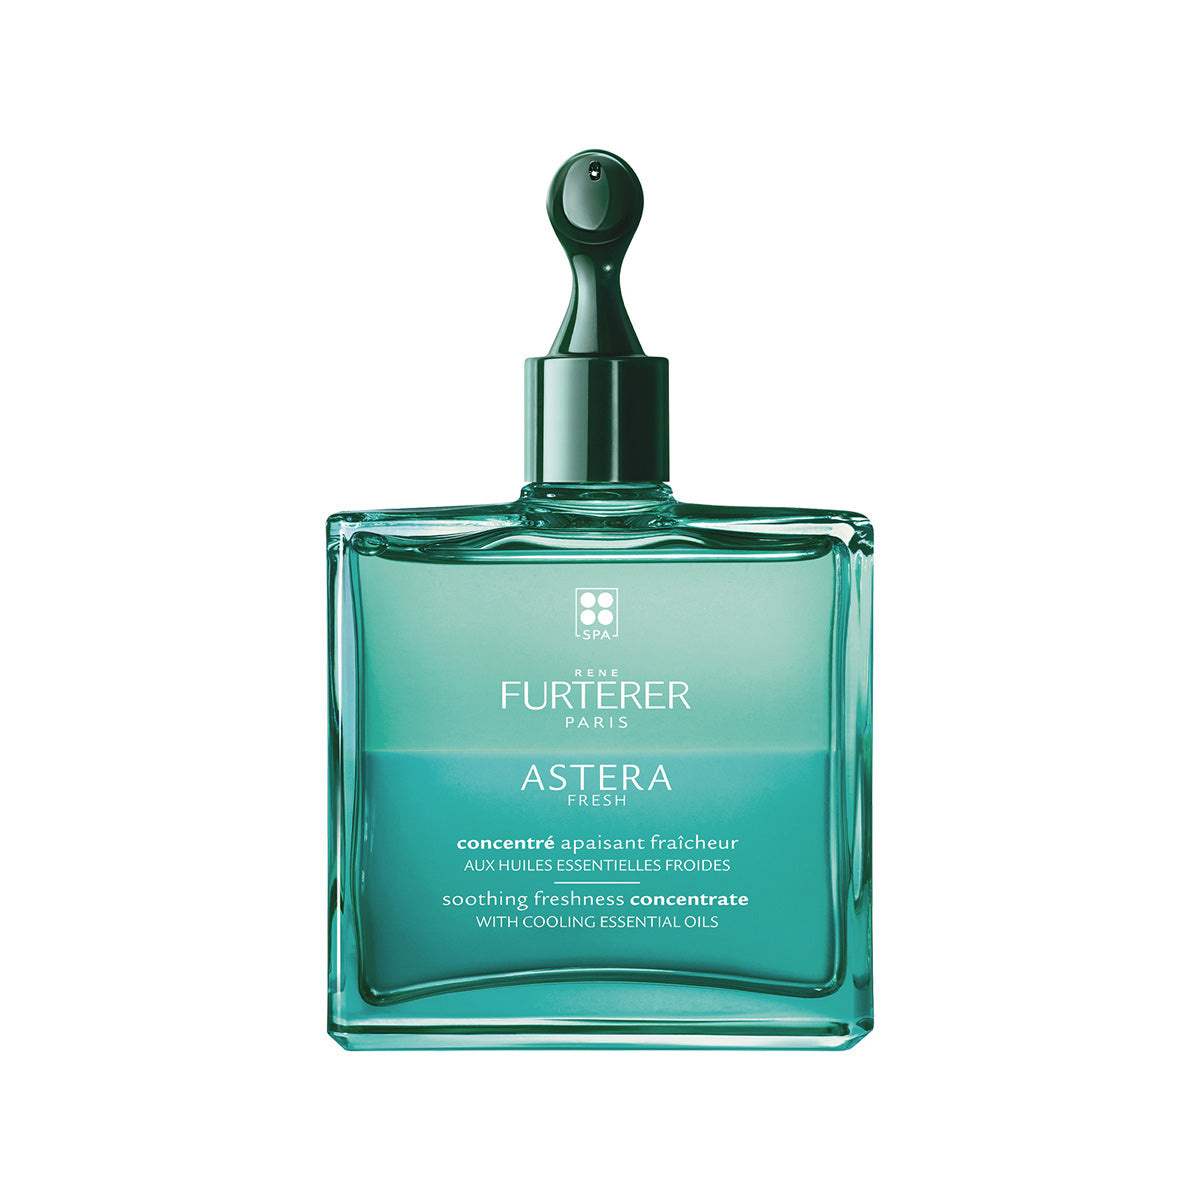 Rene Furtere|Astera Fresh Soothing Freshness Concentrate|50ml